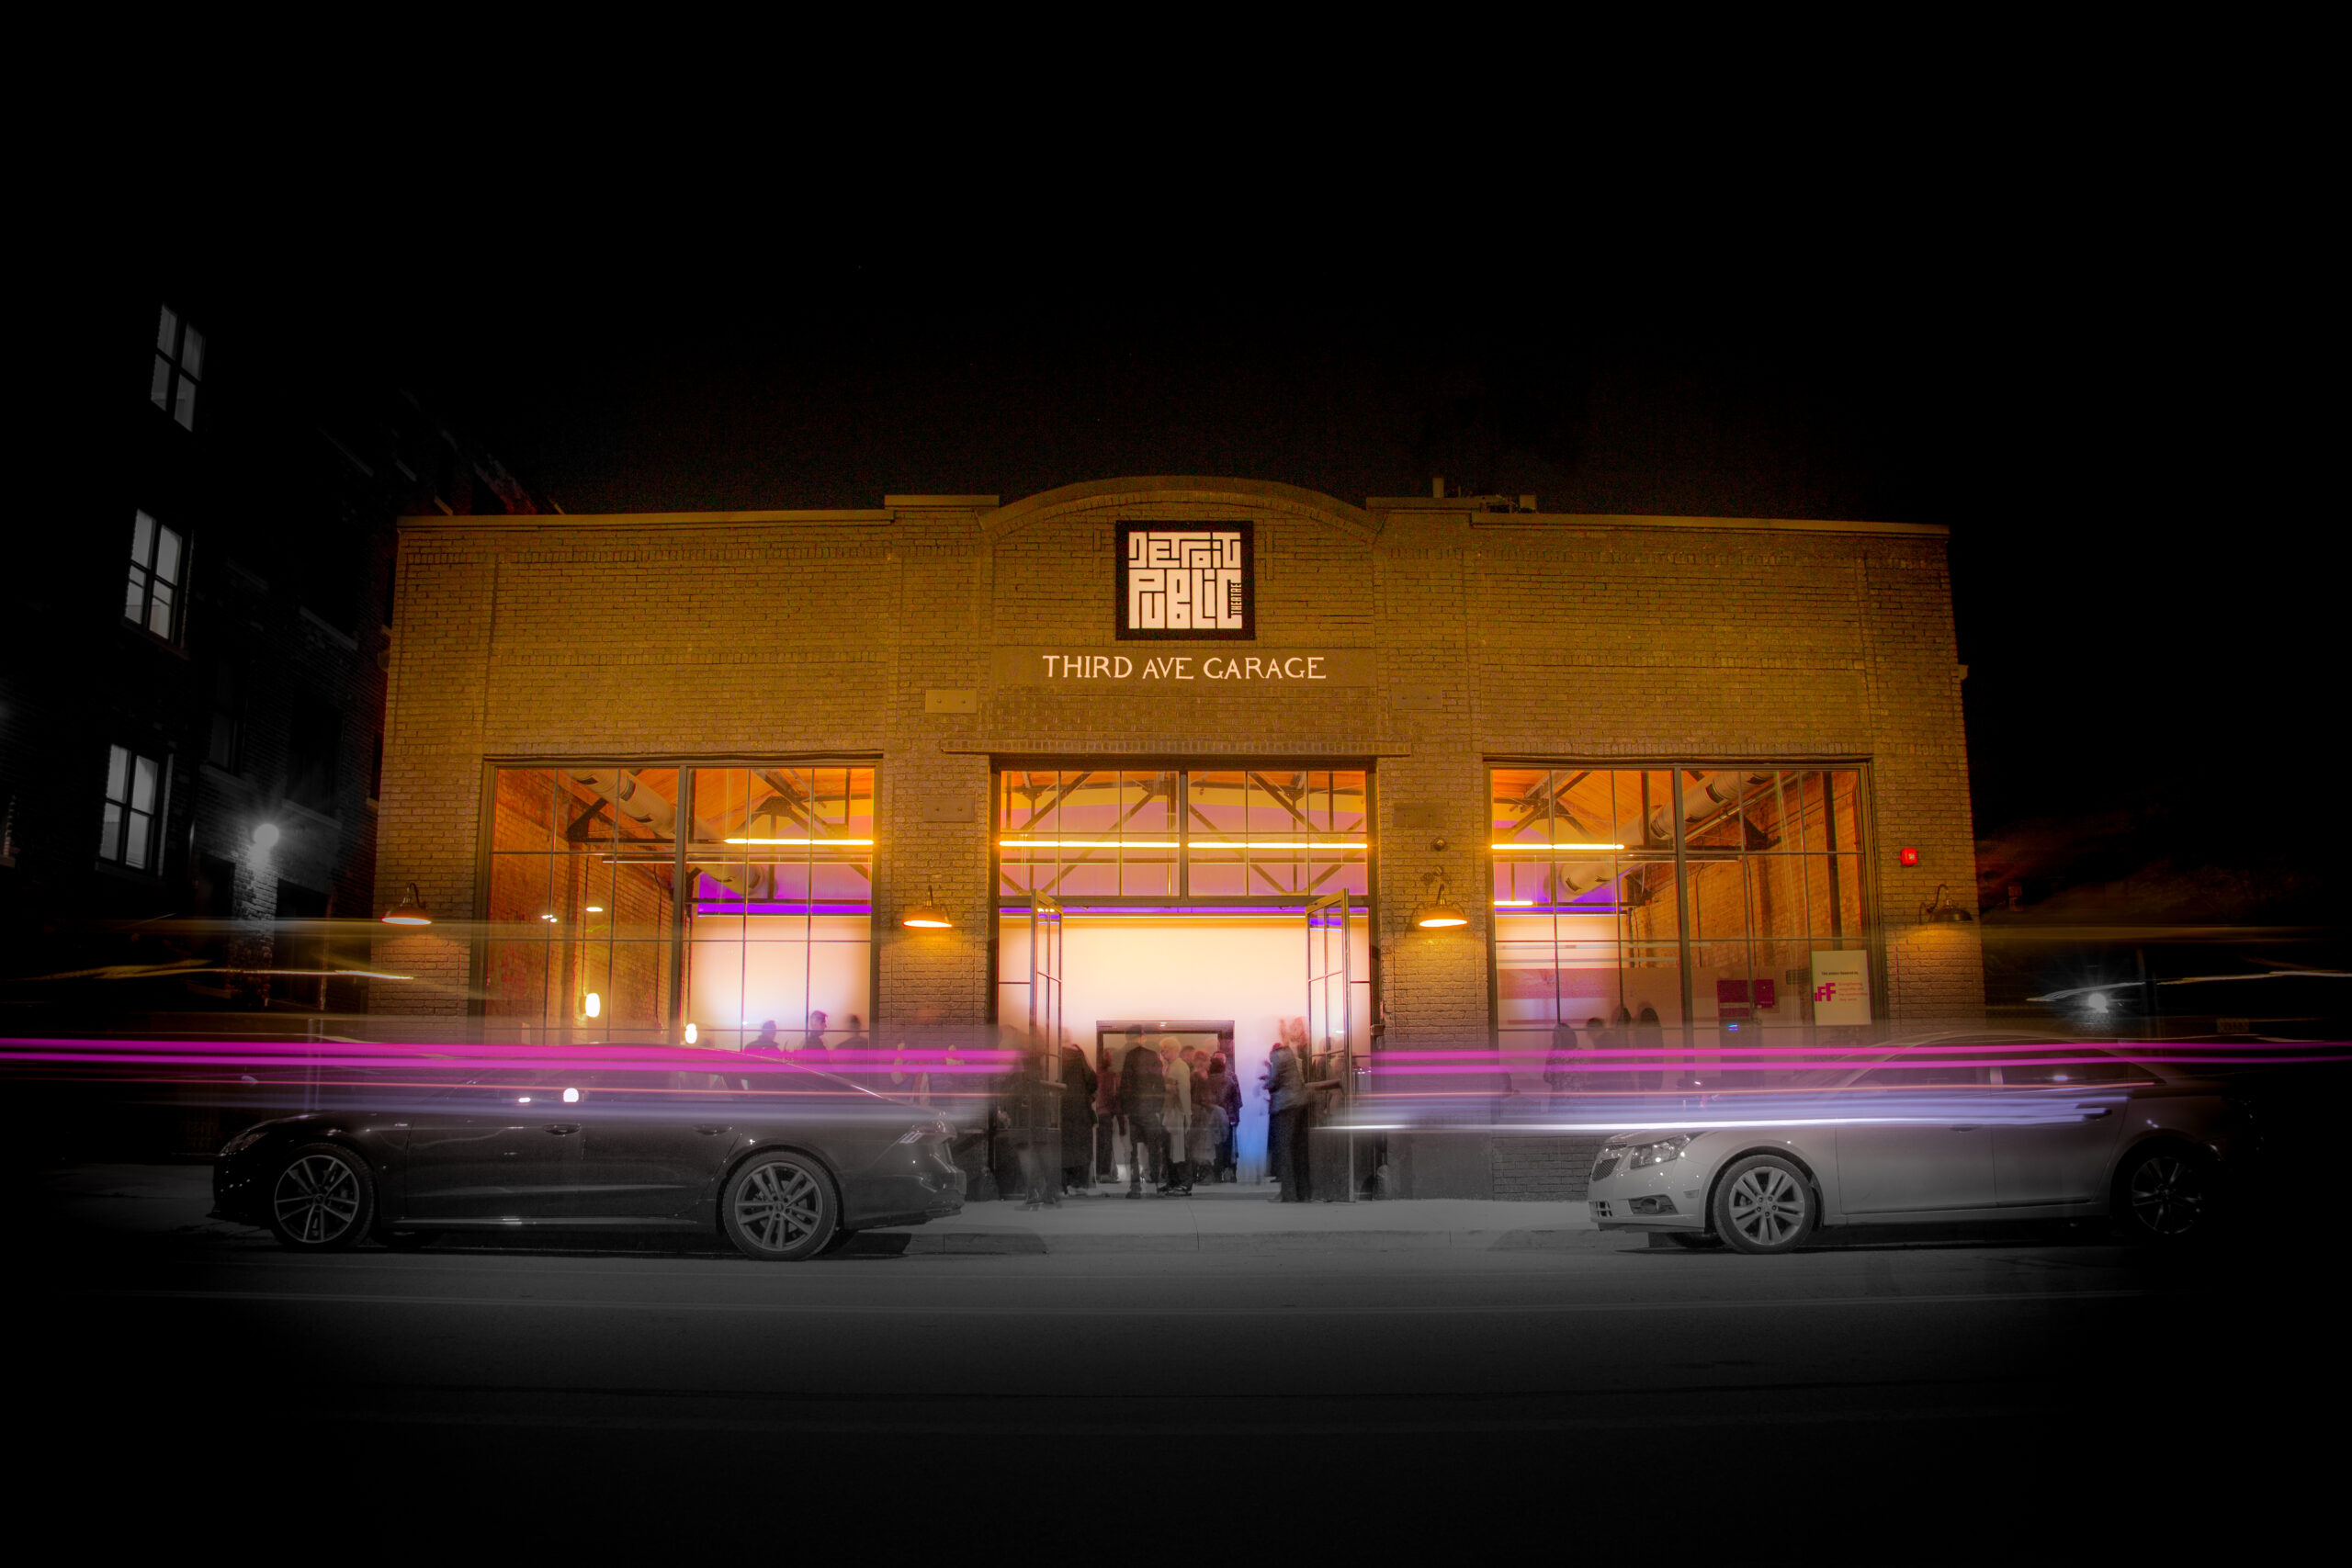 A facade of a one-story beige-colored building with lettering that reads "Third Ave Garage" under a stylistic logo of the Detroit Public Theatre. The photo was taken during night time, so lights are shining through the building's large square windows, and cars are trailing the foreground of the image.